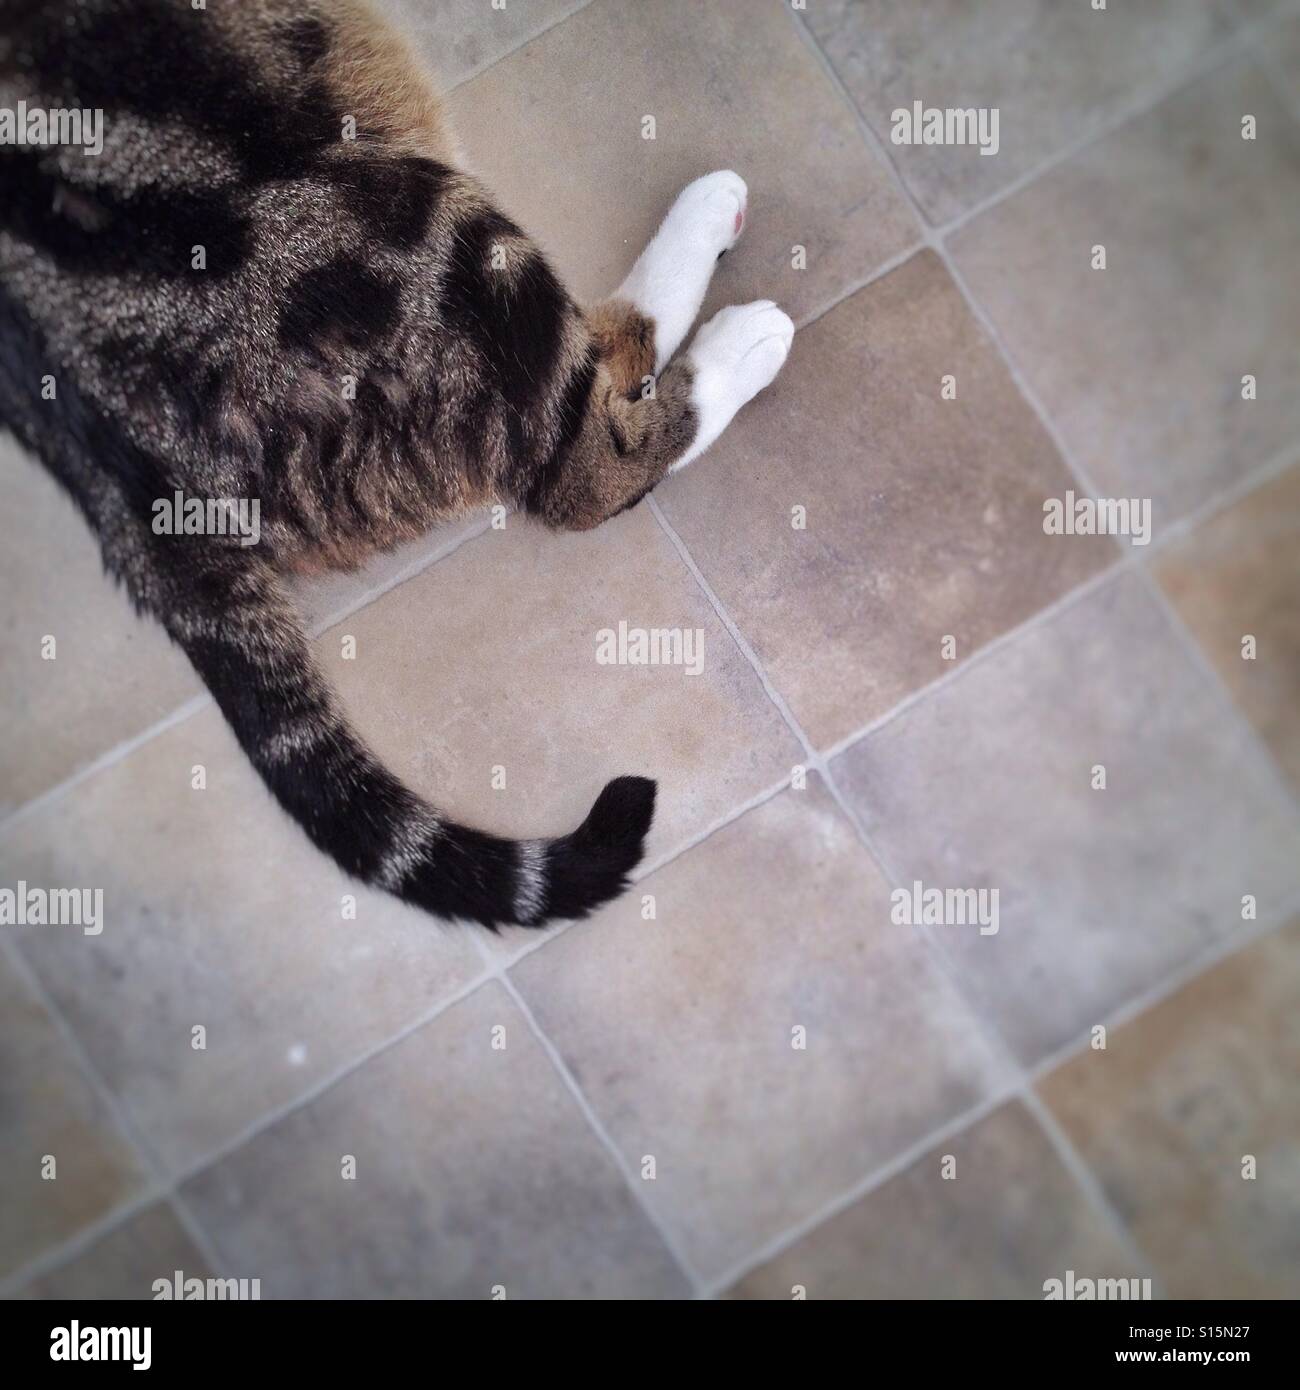 Tabby cat's rear legs and tail laying on the floor of a kitchen. Stock Photo